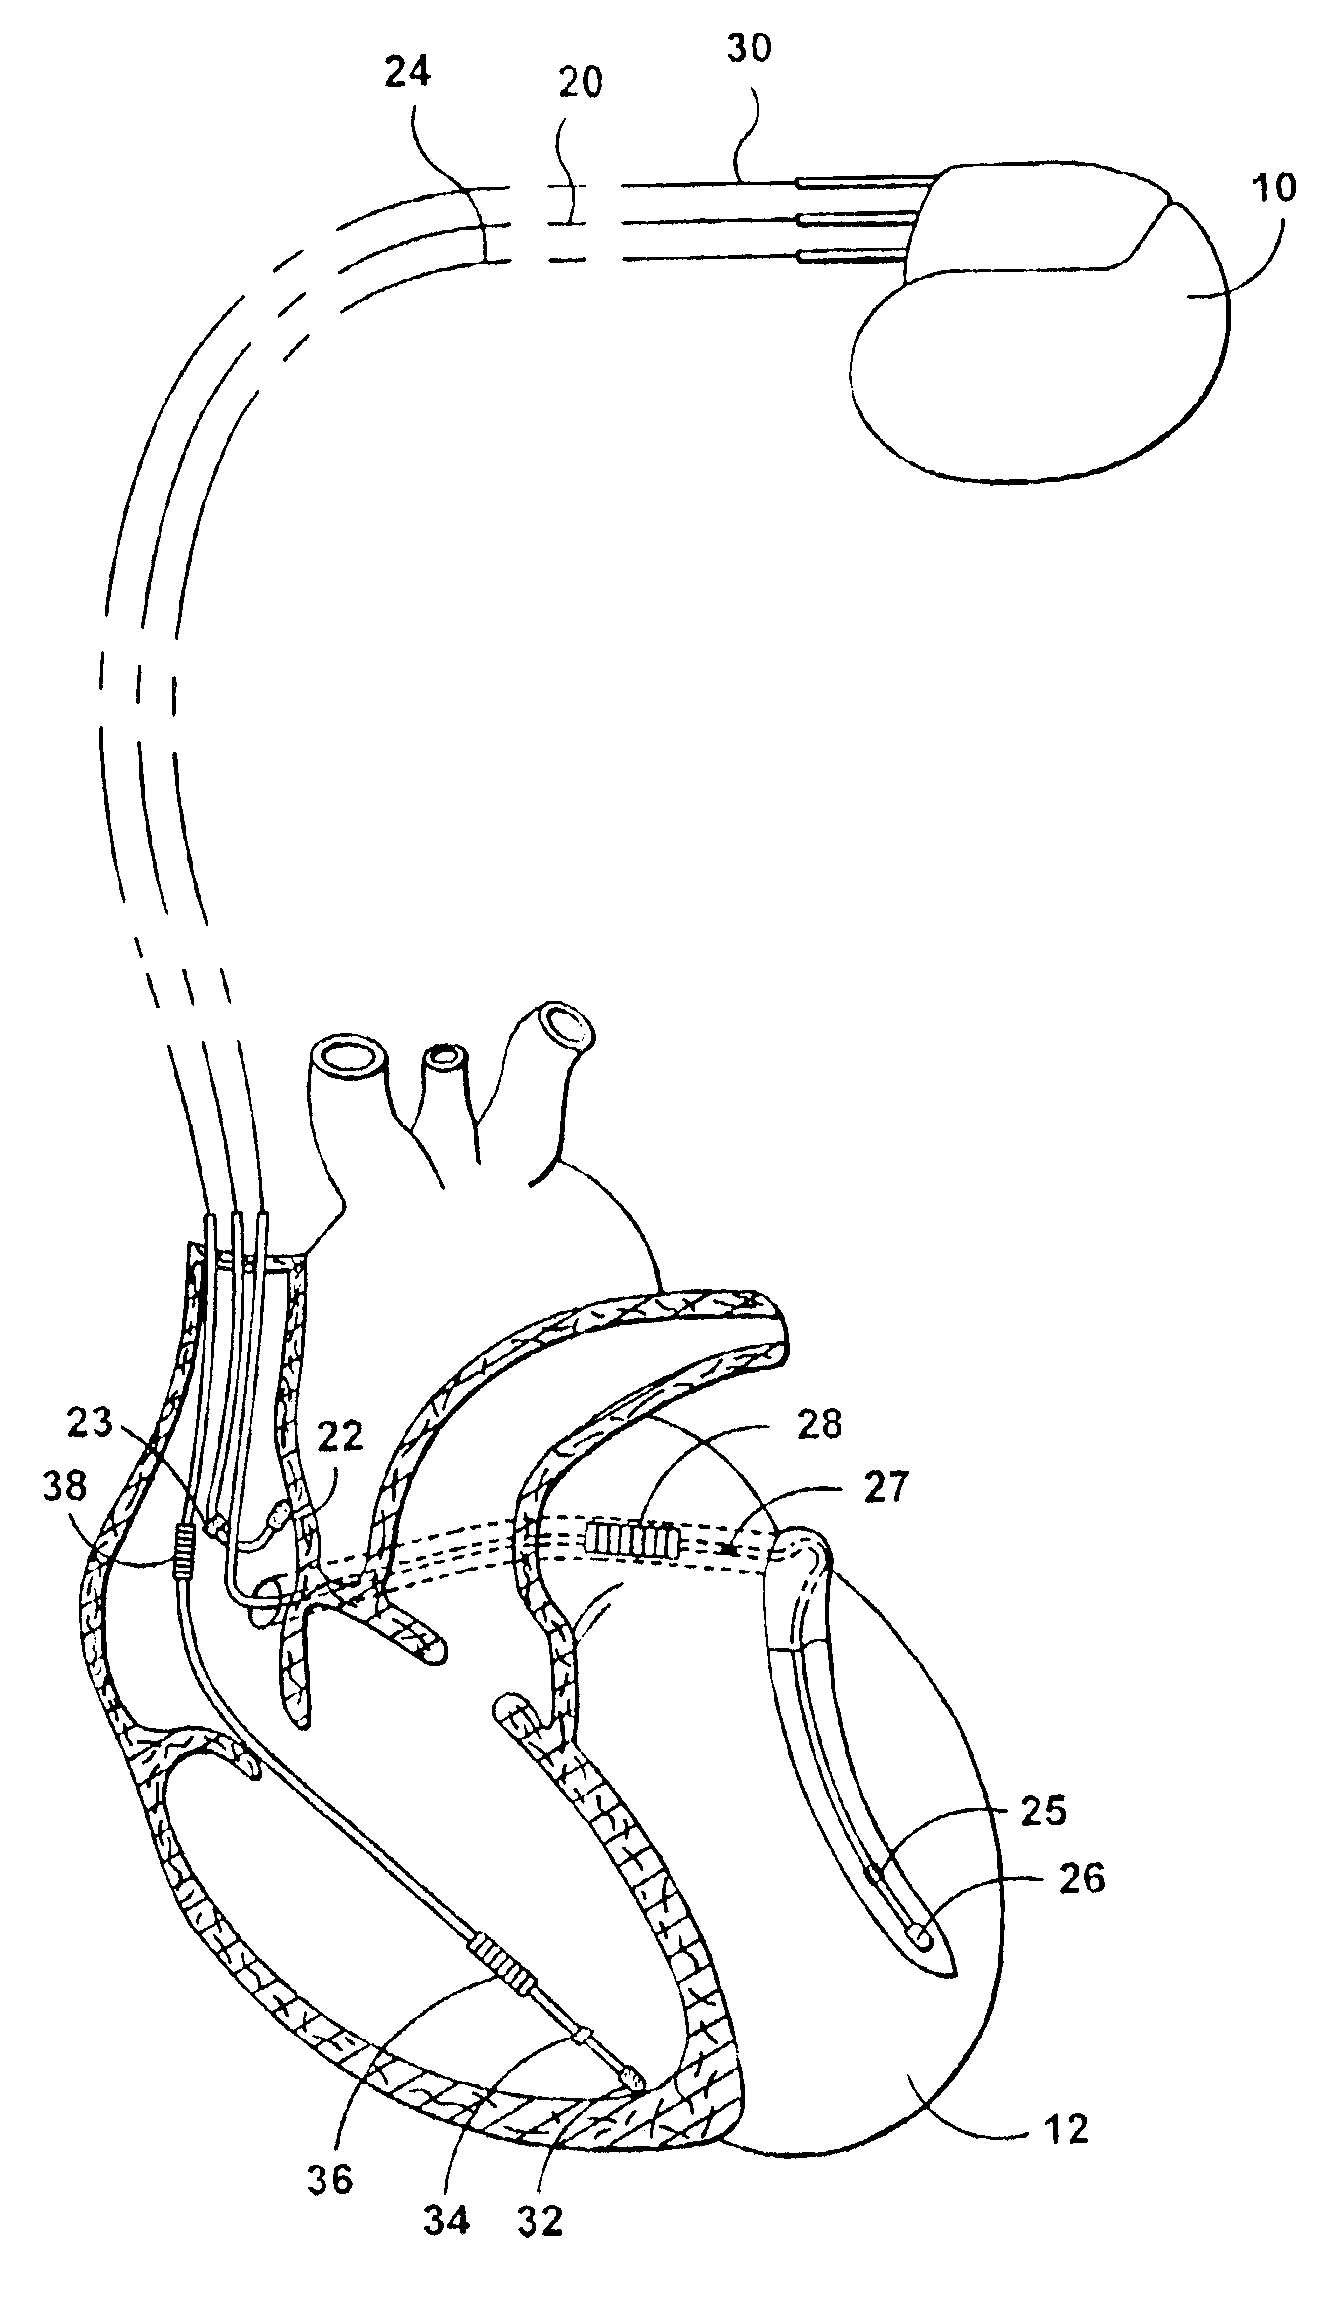 Multi-site cardiac stimulation device and method for detecting retrograde conduction